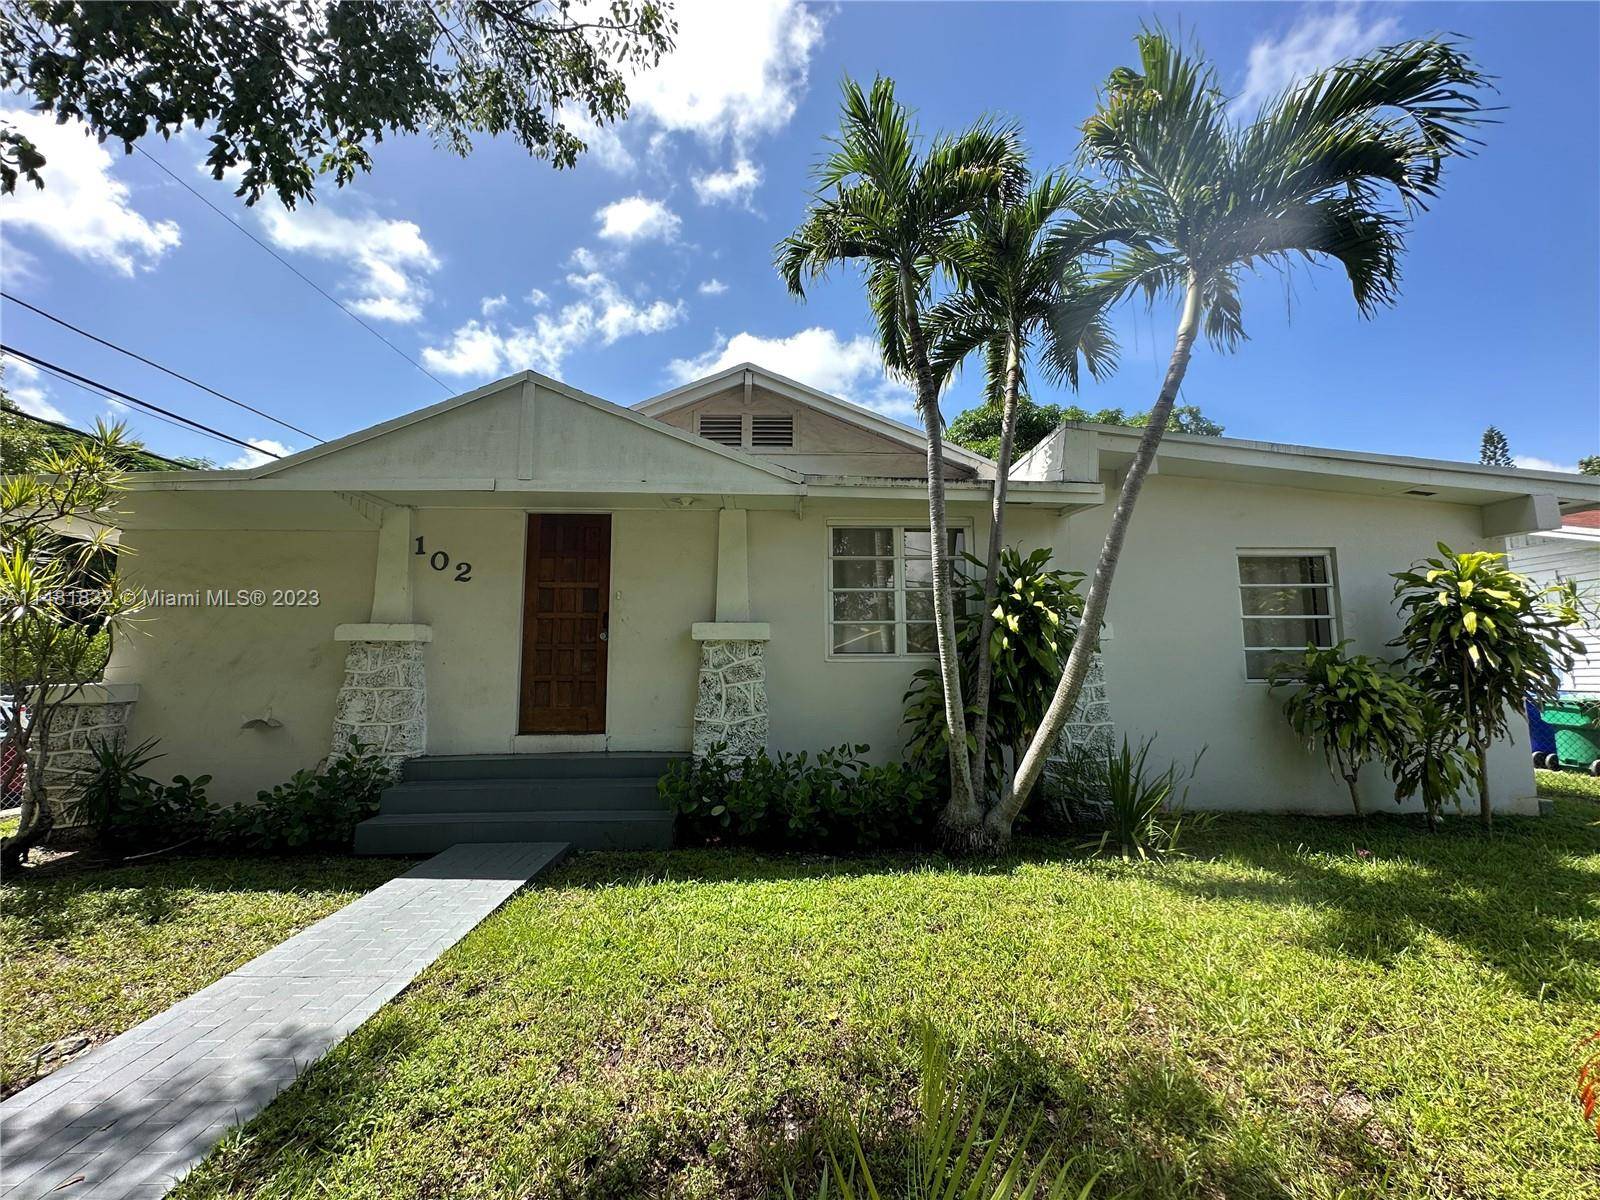 This home is just one block from Midtown, minutes from Wynwood, Design District and the beach.